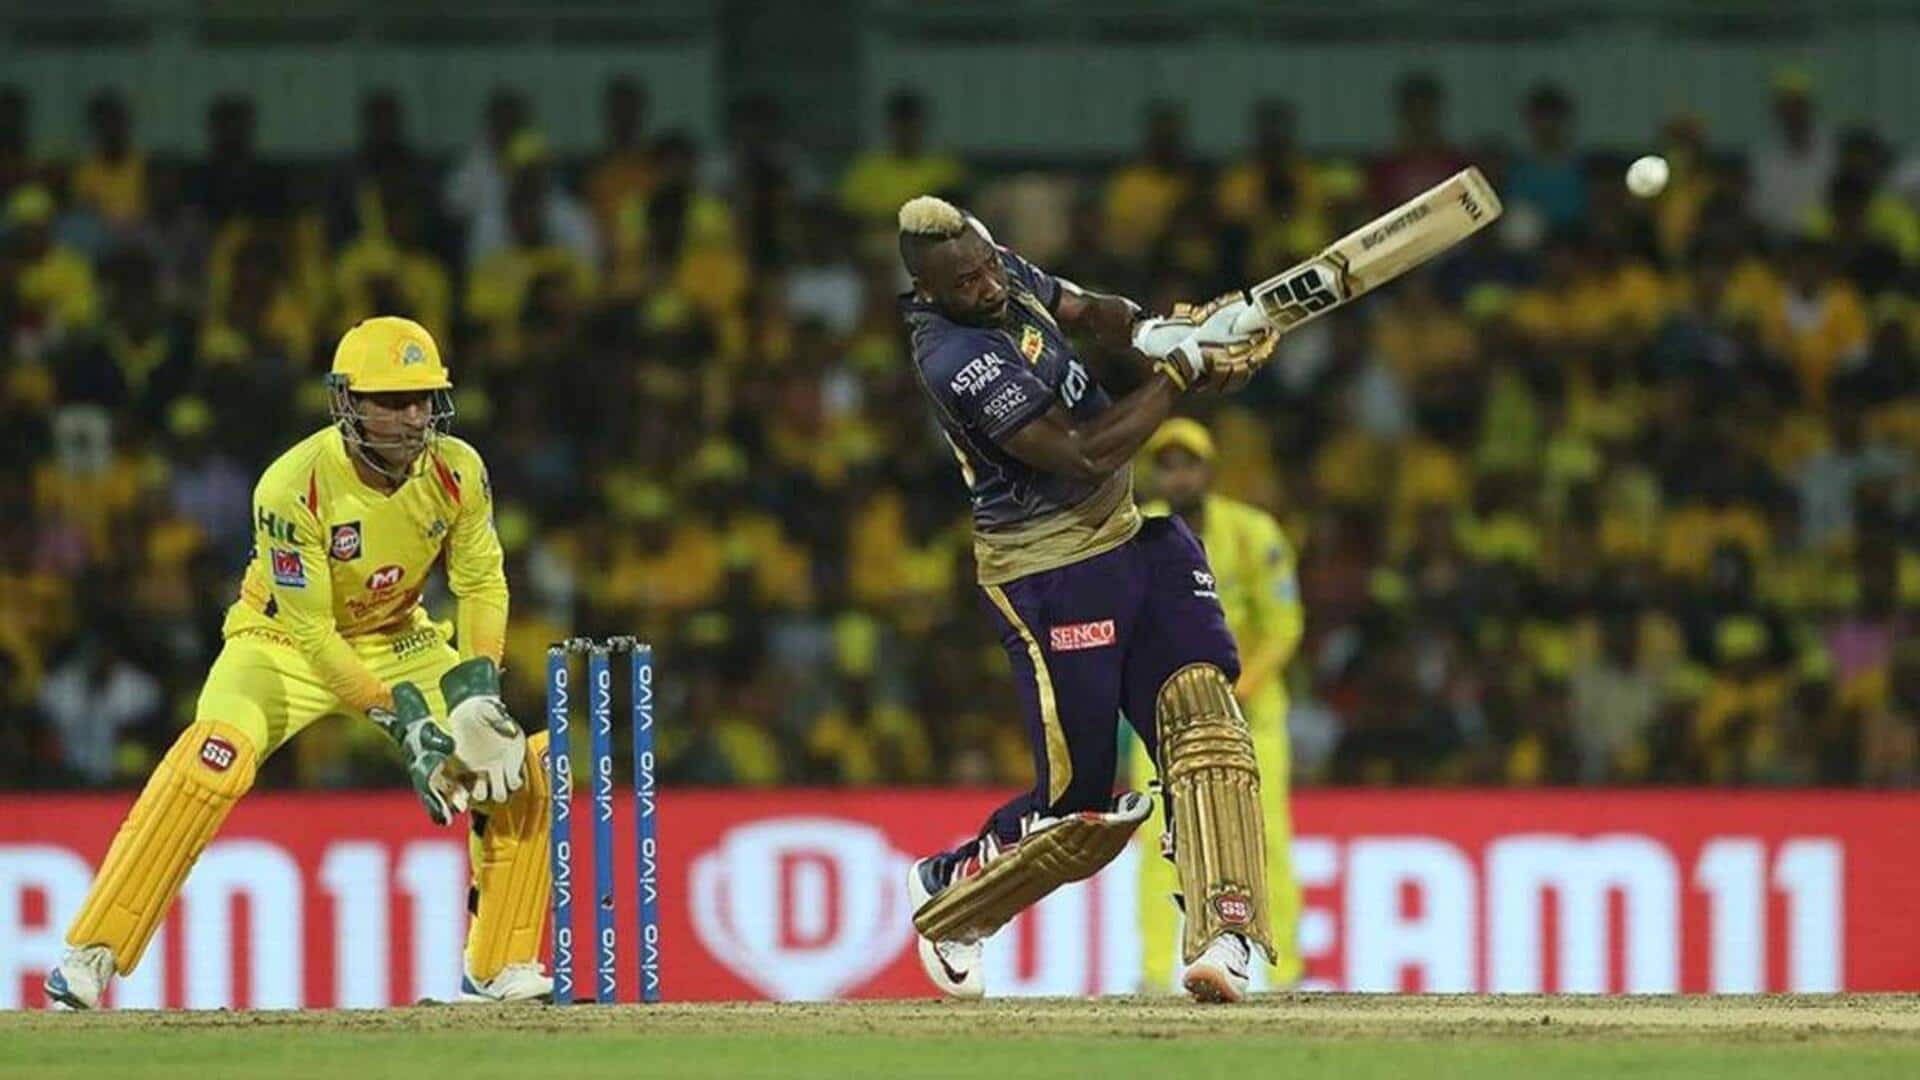 Andre Russell strikes at 168 against CSK: Key stats